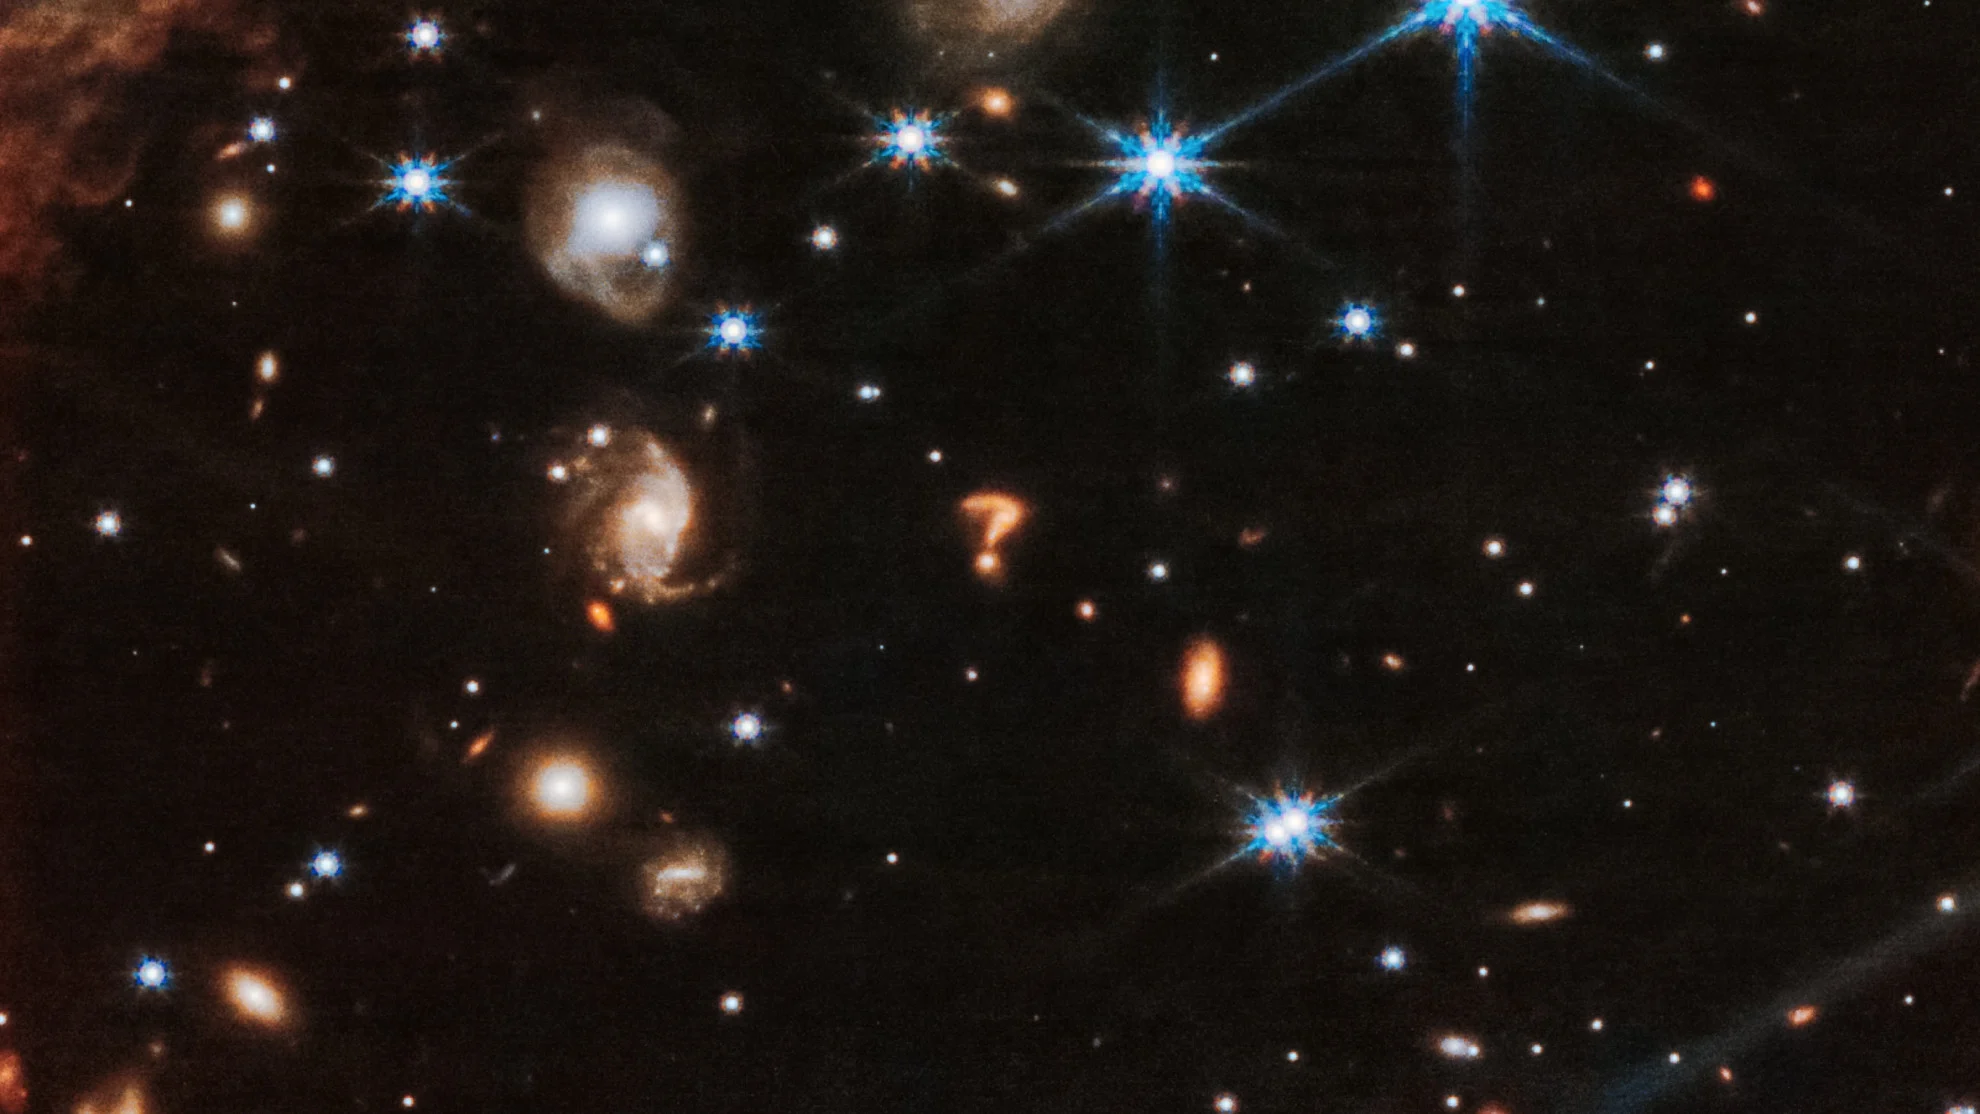 Webb spots a 'cosmic question mark' while peering at rambunctious young stars